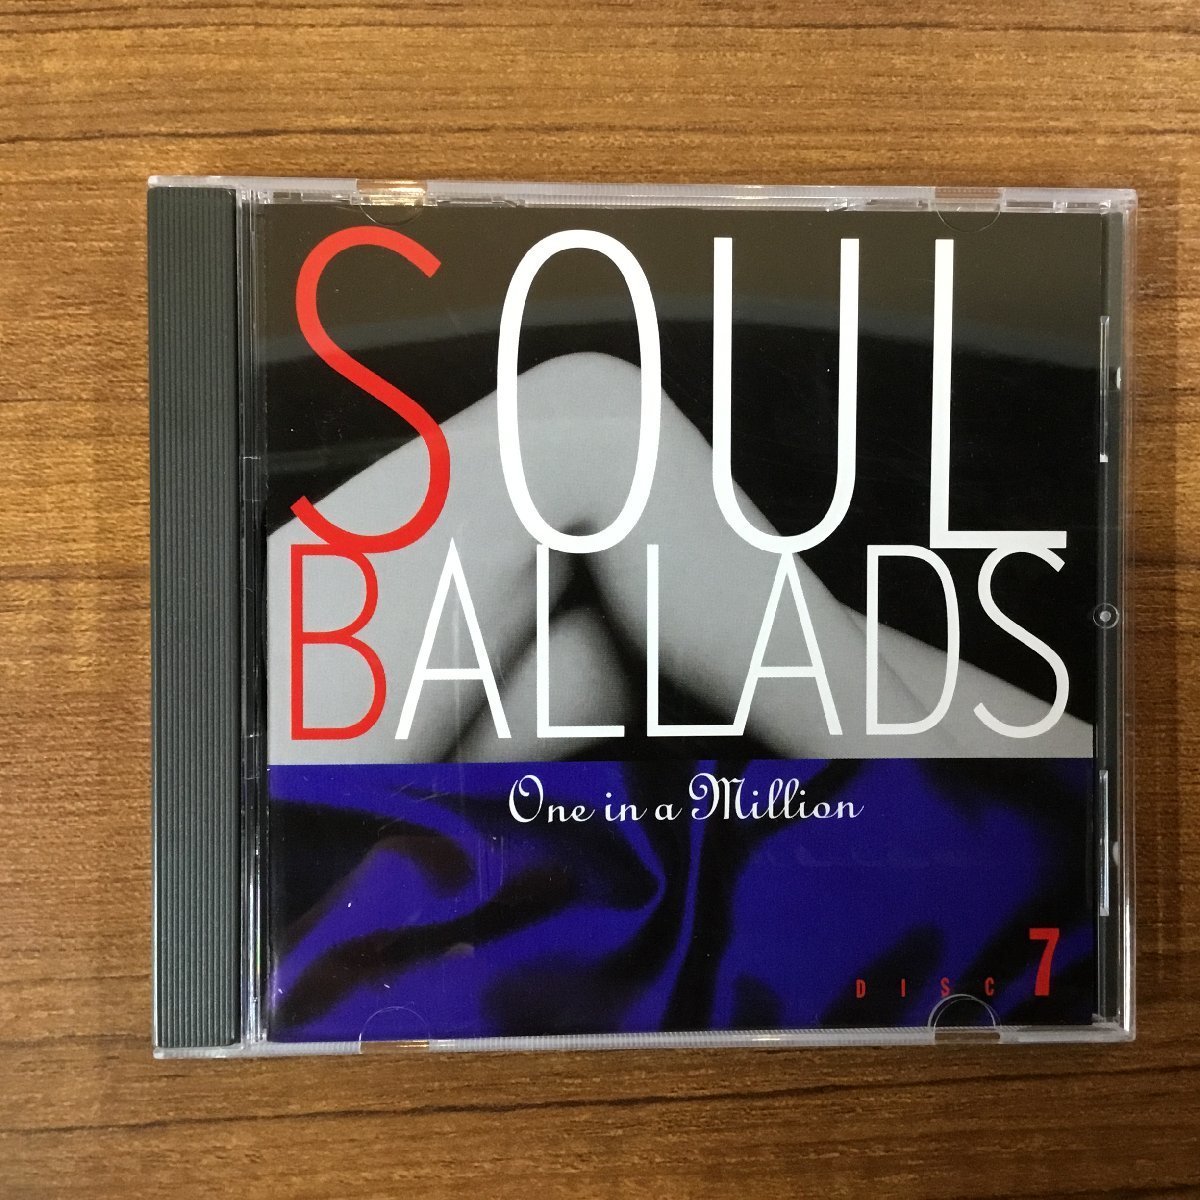  valuable records out of production SOUL BALLADS One in a Million domestic record 7 sheets set Kirameki ....R&B masterpiece full load . bending absolutely not equipped. un- .. masterpiece *. large become music . production 